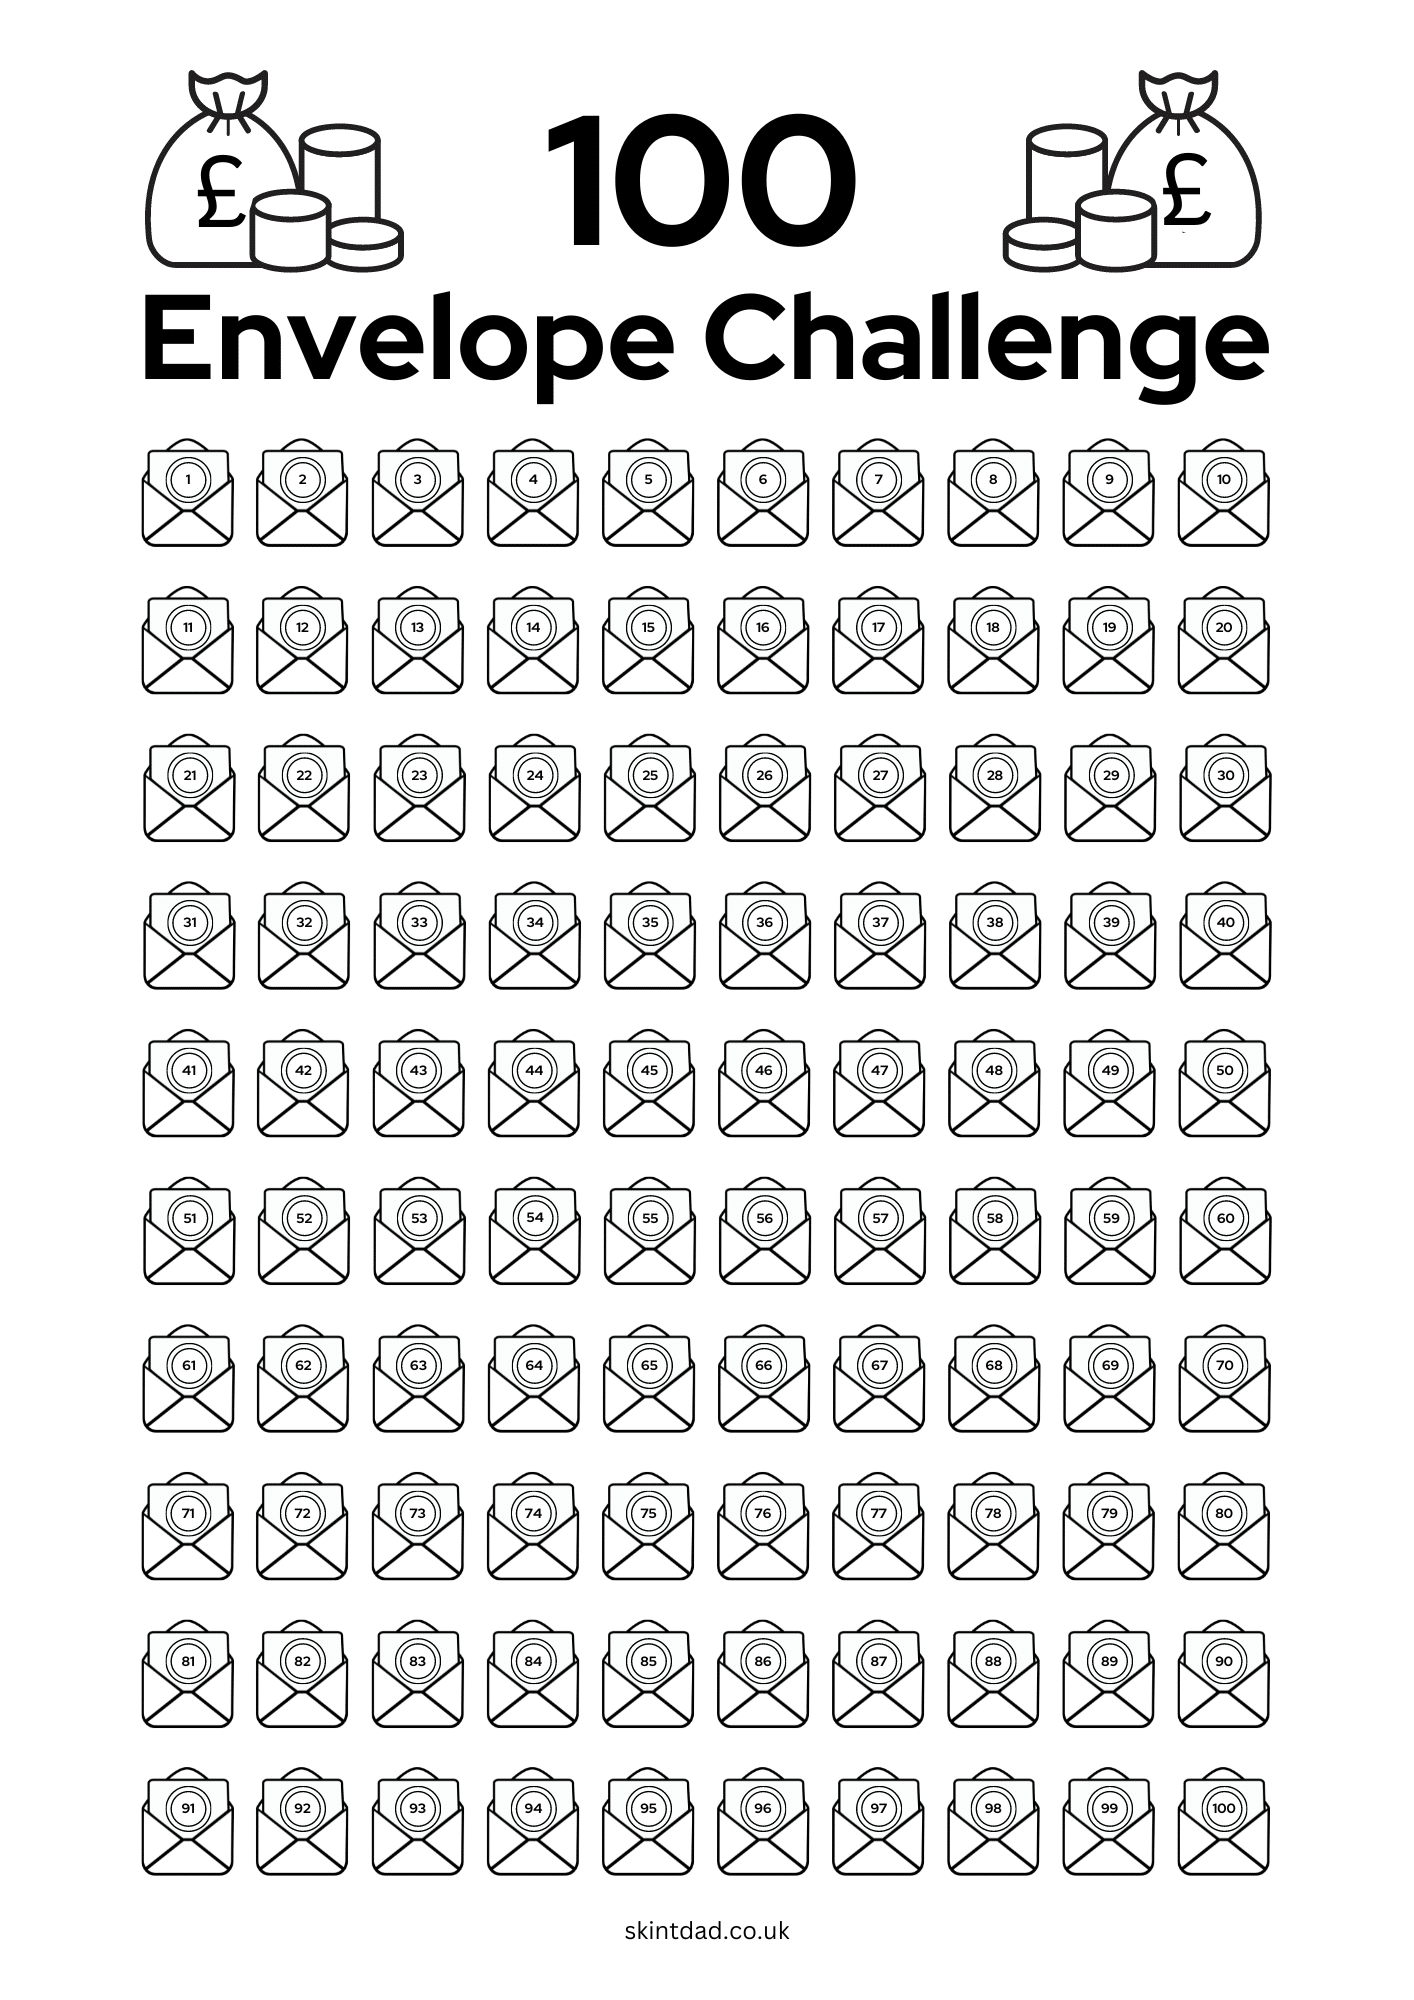 100-envelope-challenge-how-much-you-can-save-and-how-to-start-skint-dad